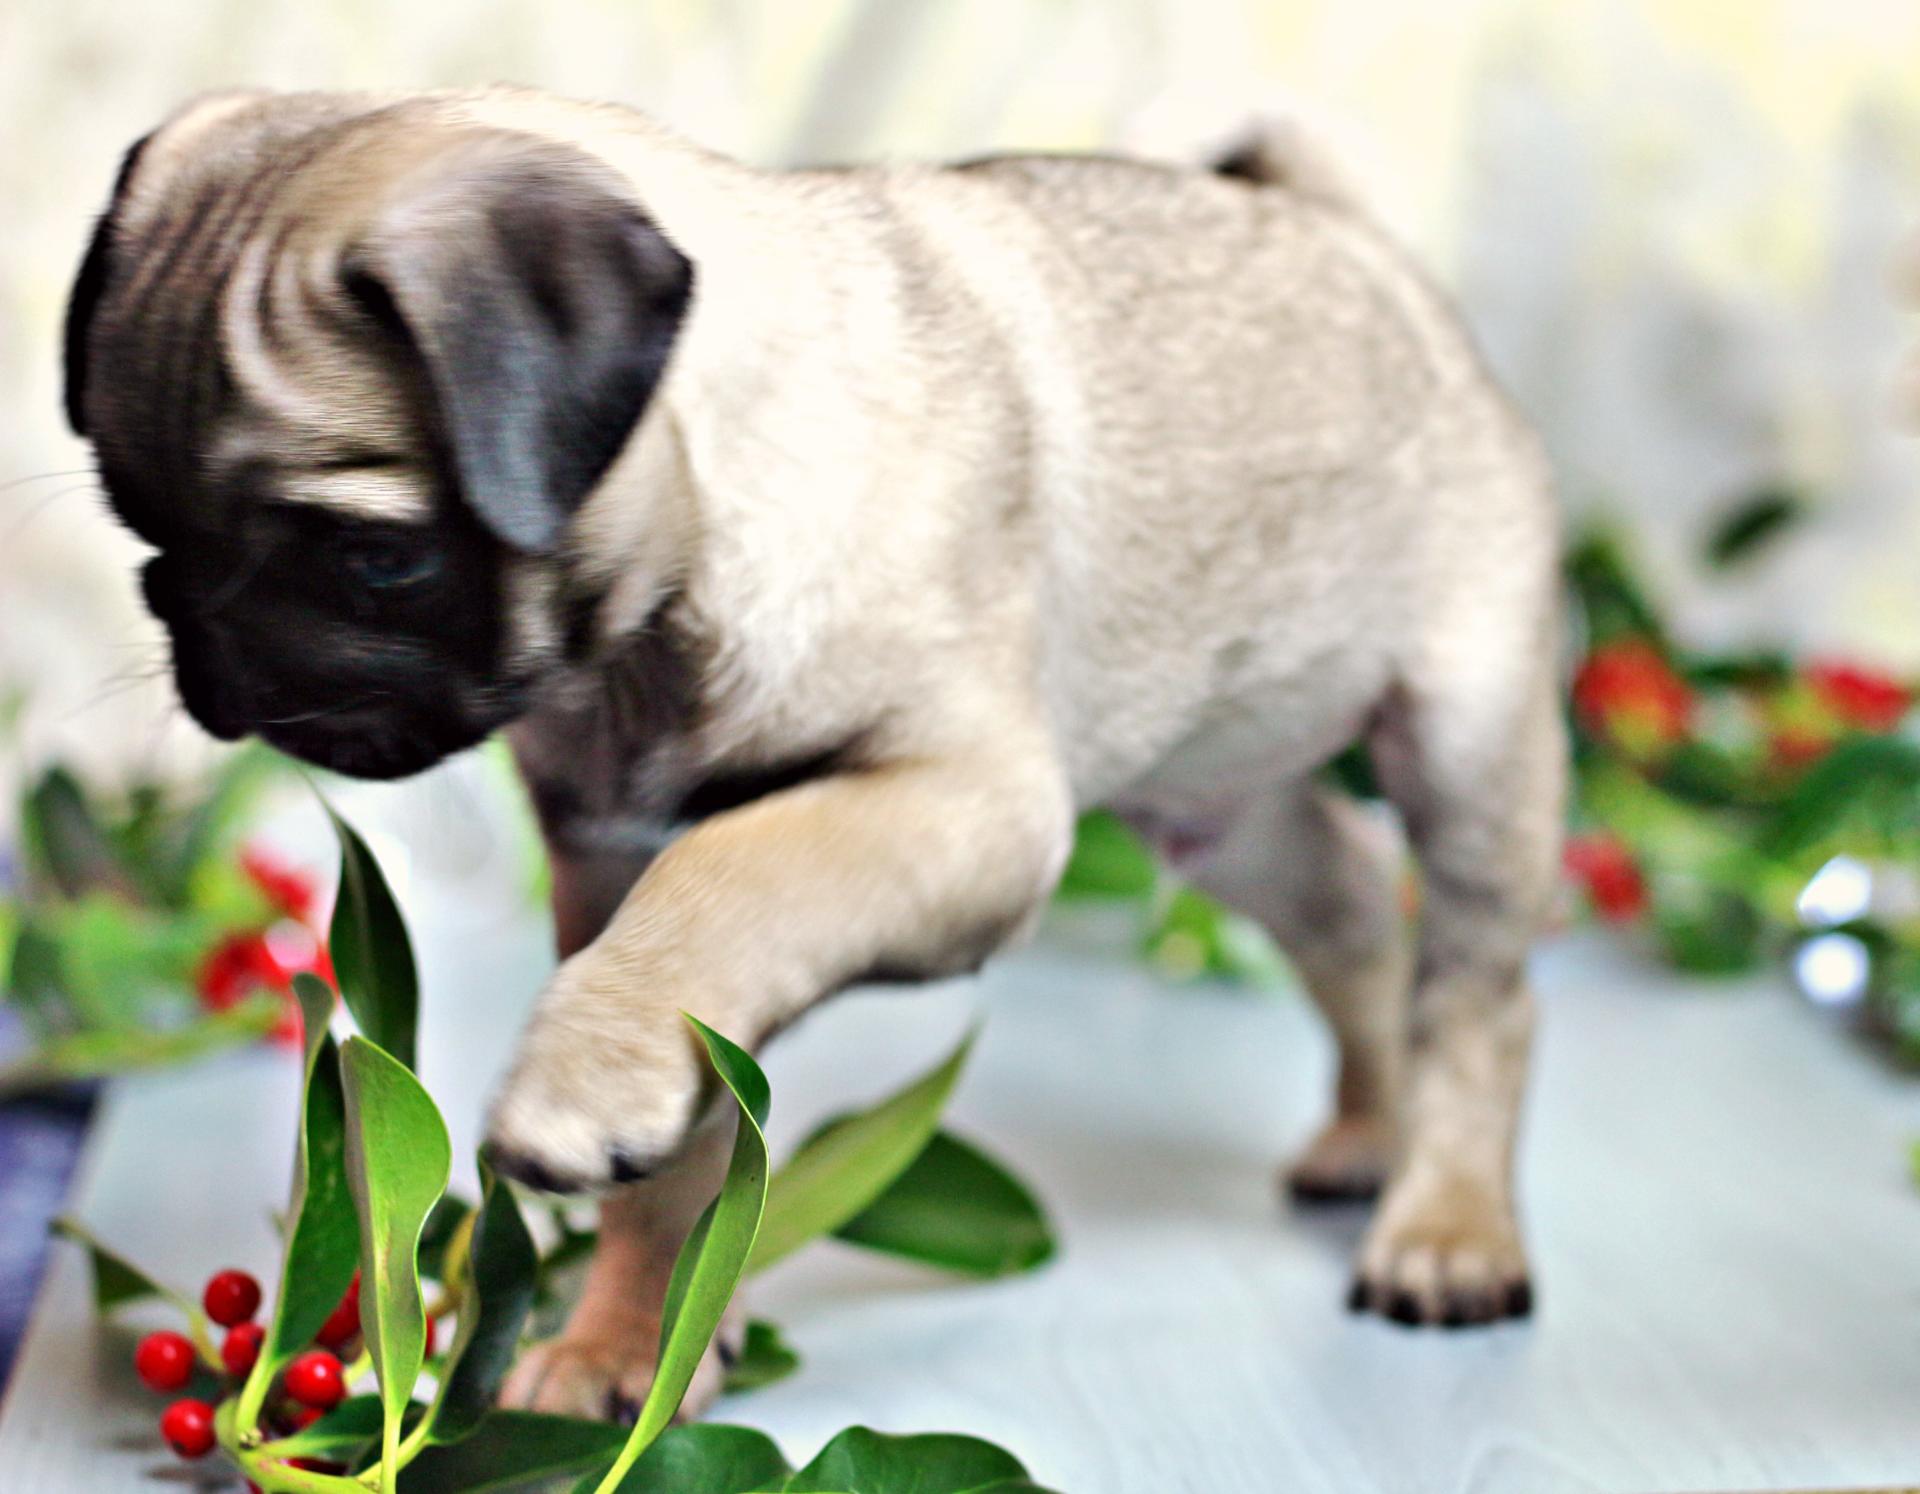 sonny the pug 10 weeks old pawing